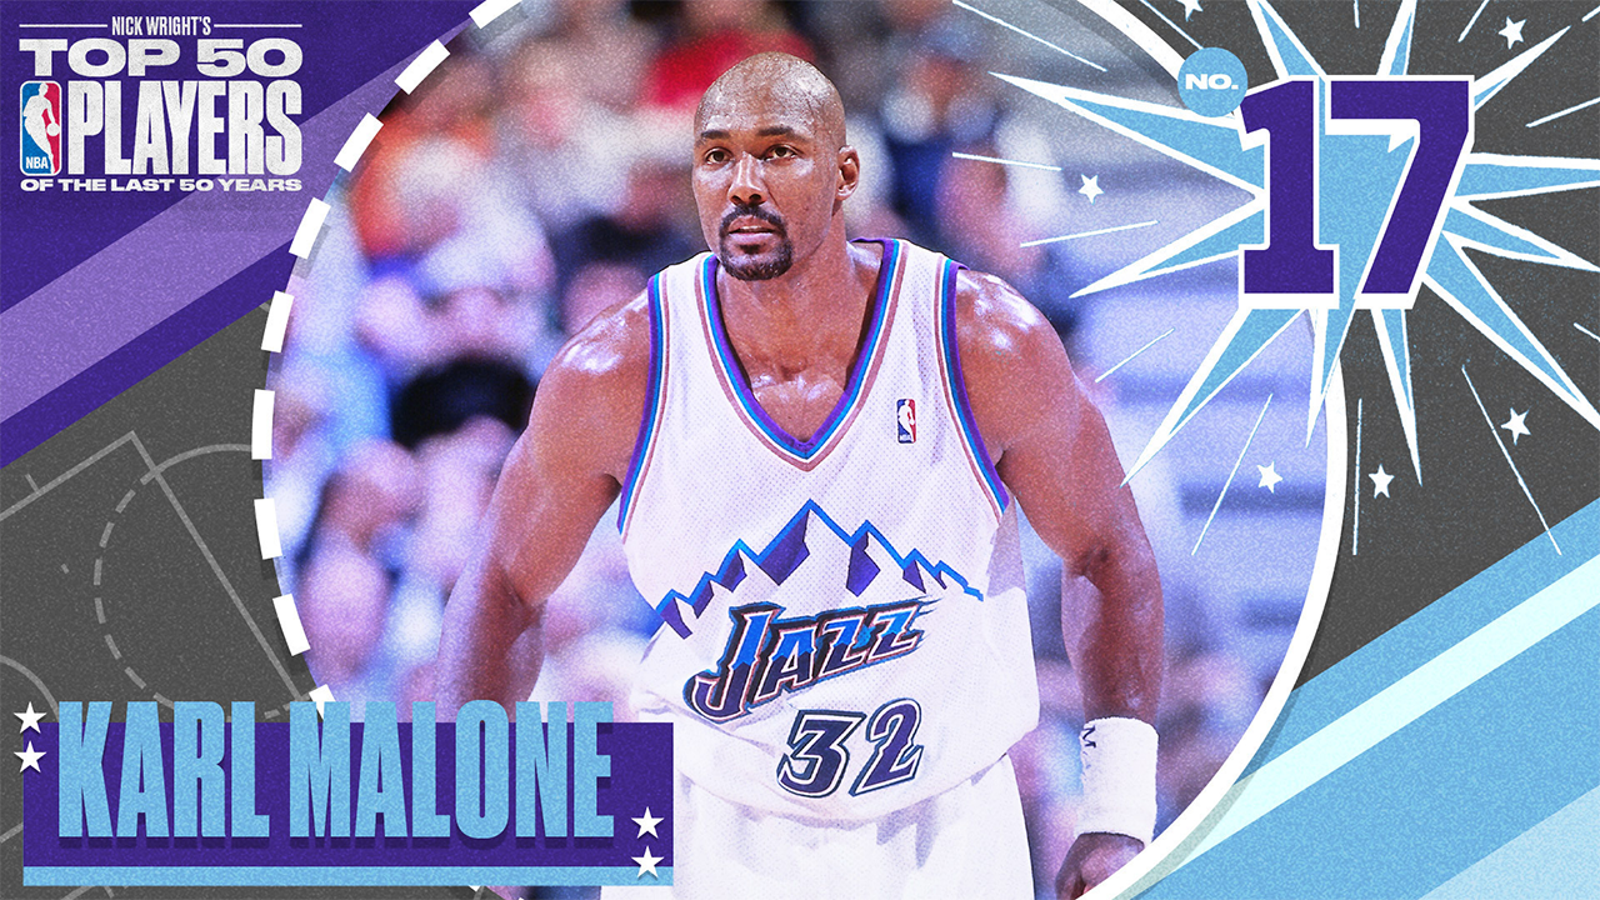 Karl Malone is No. 17 on Nick Wright's Top 50 NBA Players of the Last 50 Years